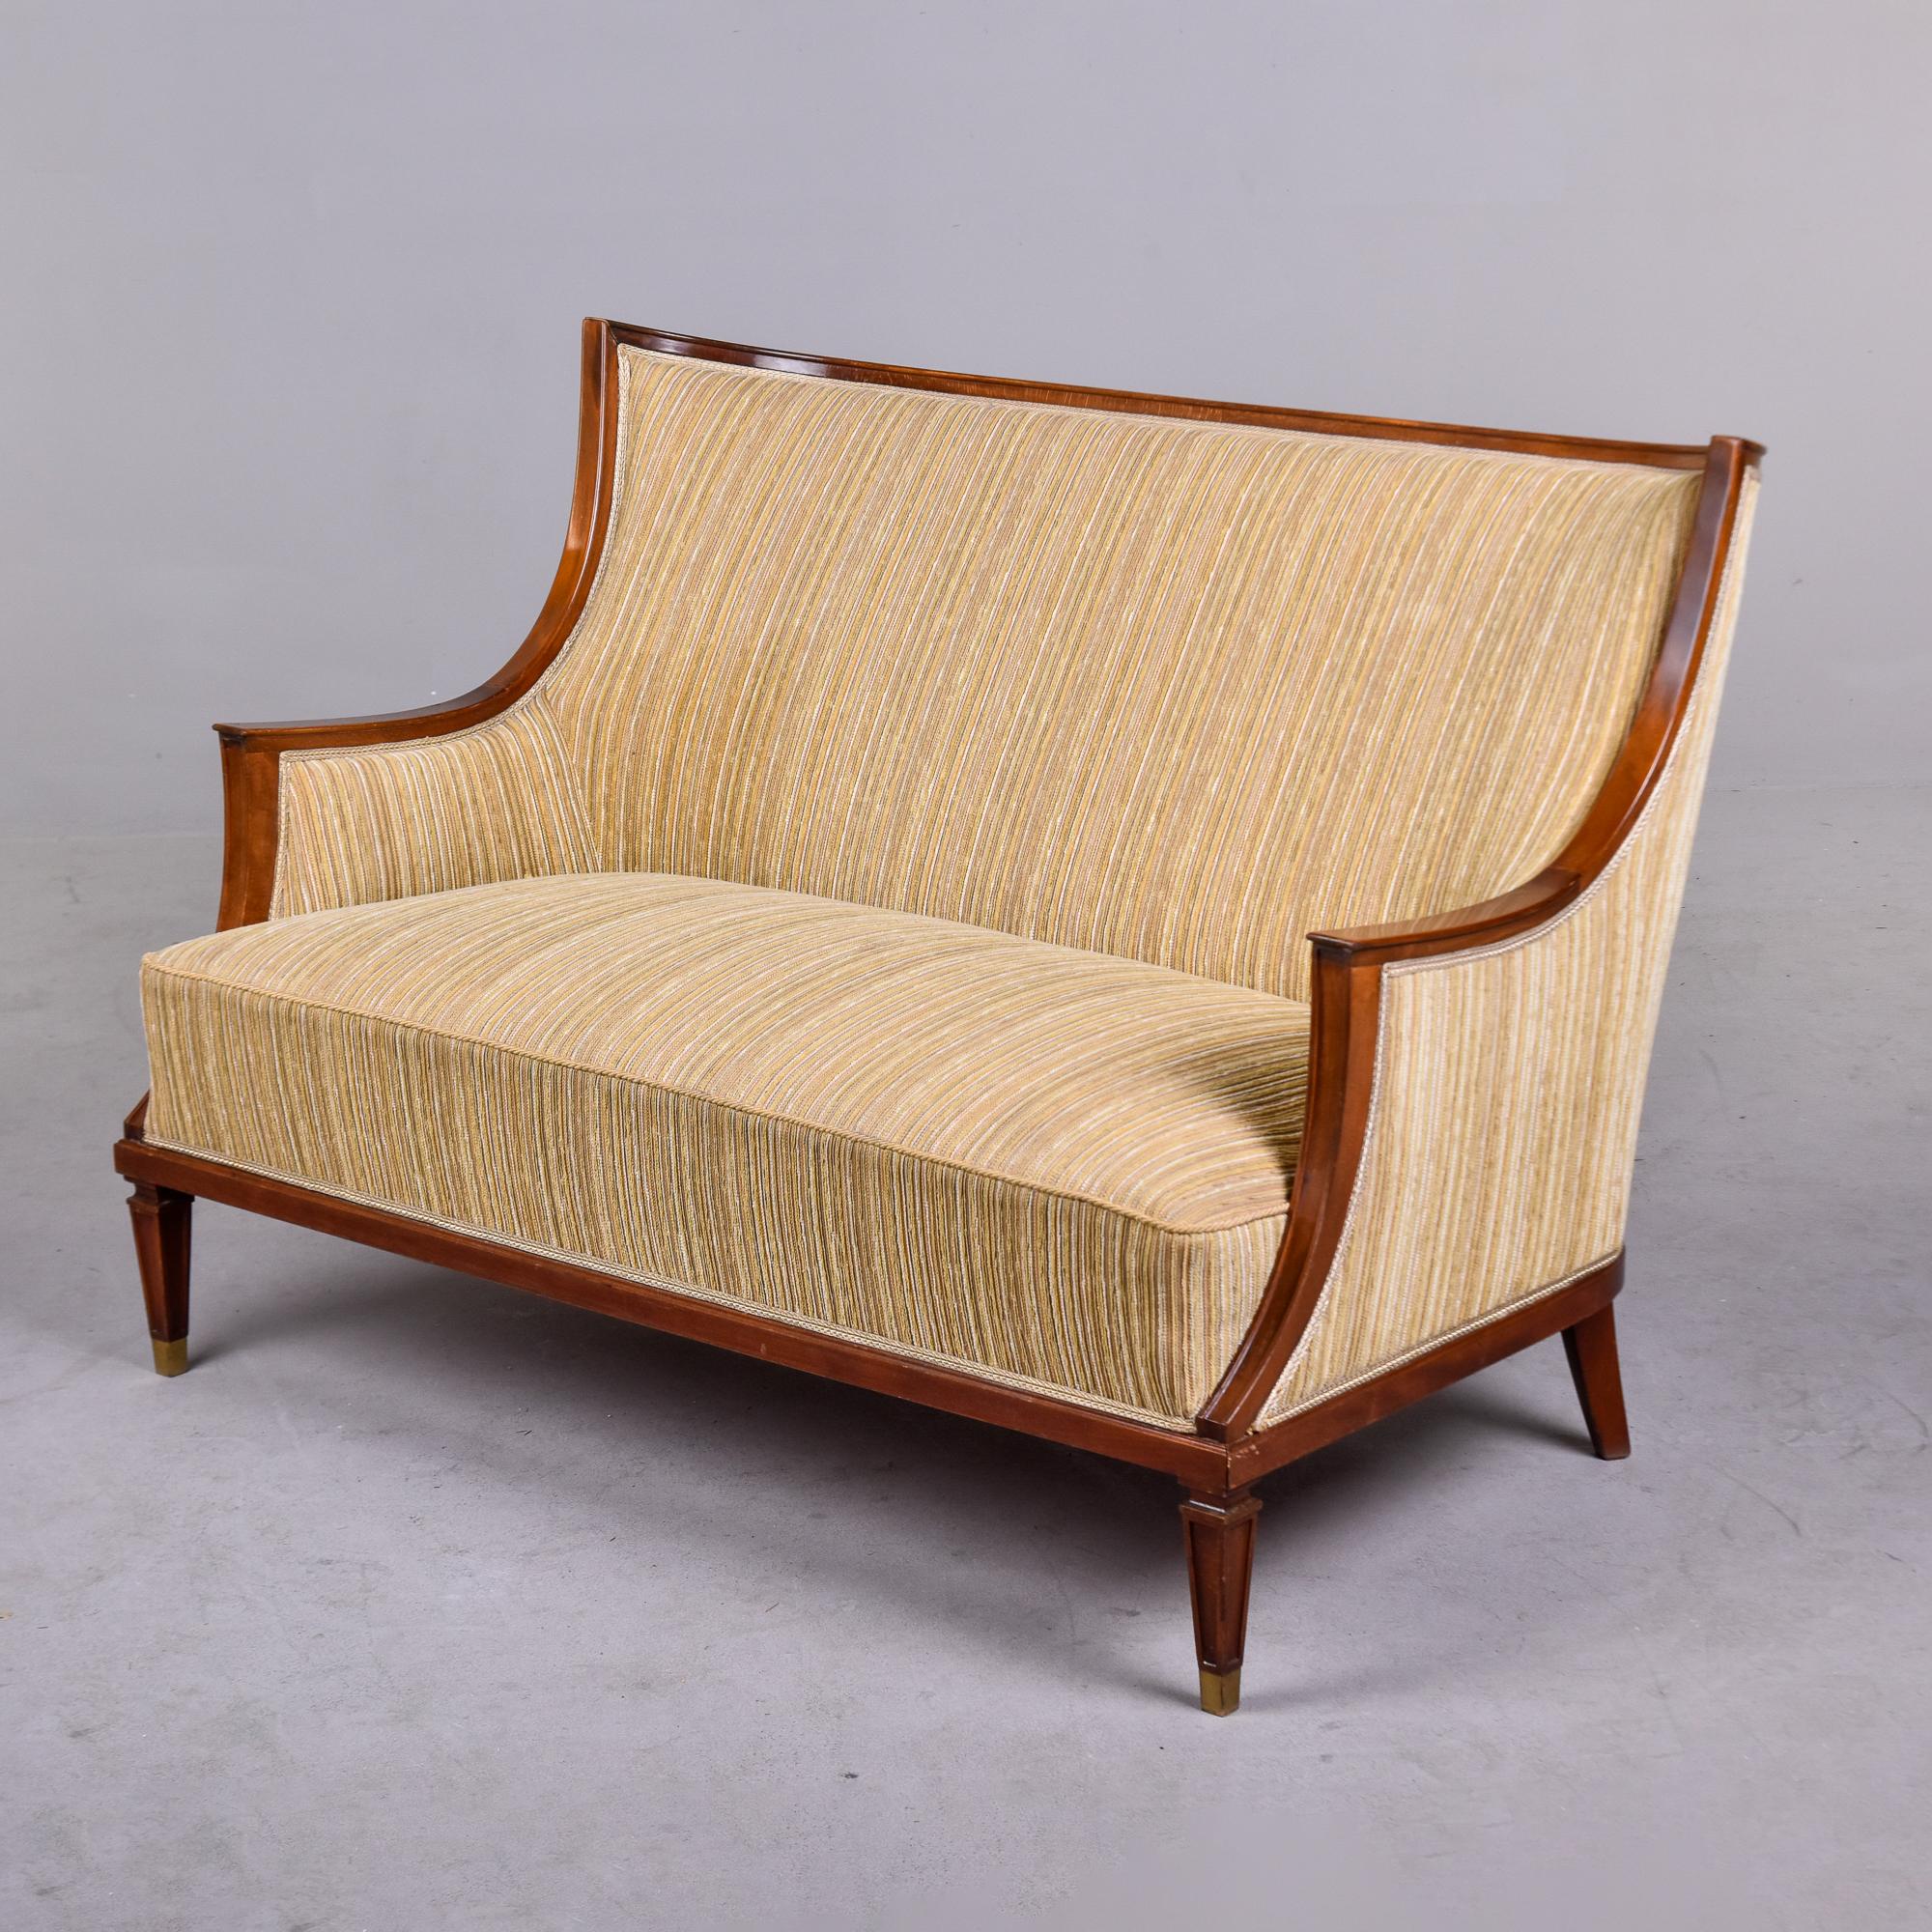 Circa 1930s small Swedish sofa with walnut frame, tall back and brass capped front legs. Sleek lines with curves and high backrest. Very solid piece with hardwood frame and spring construction. Pale gold striped chenille upholstery is in good